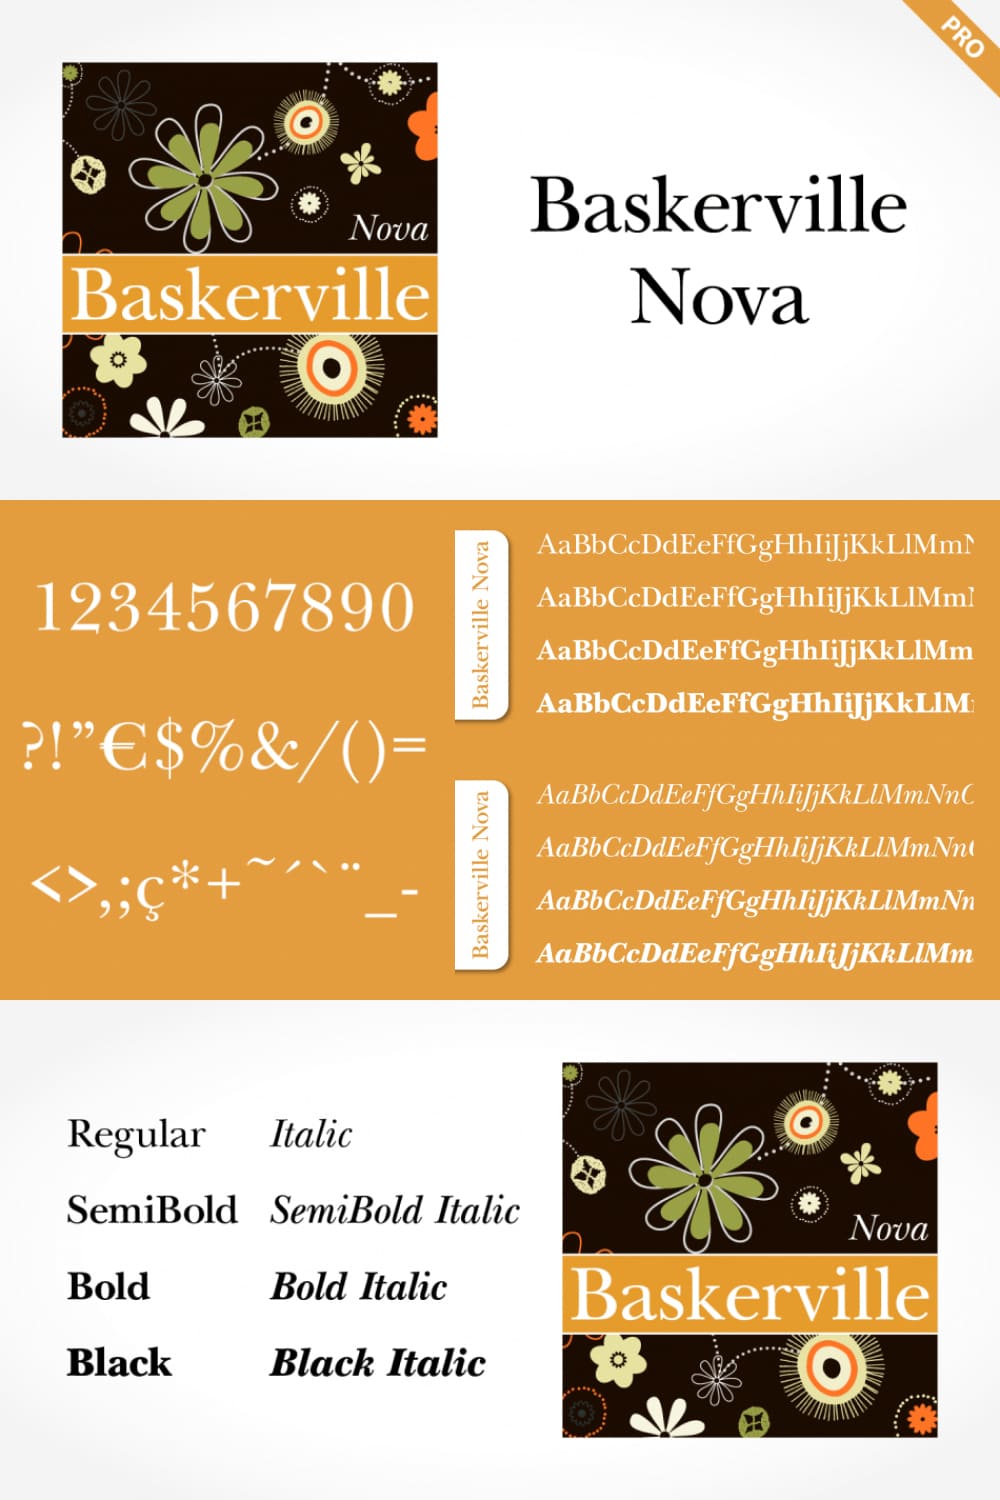 TA fresh and springy font that goes well with ornamentation.